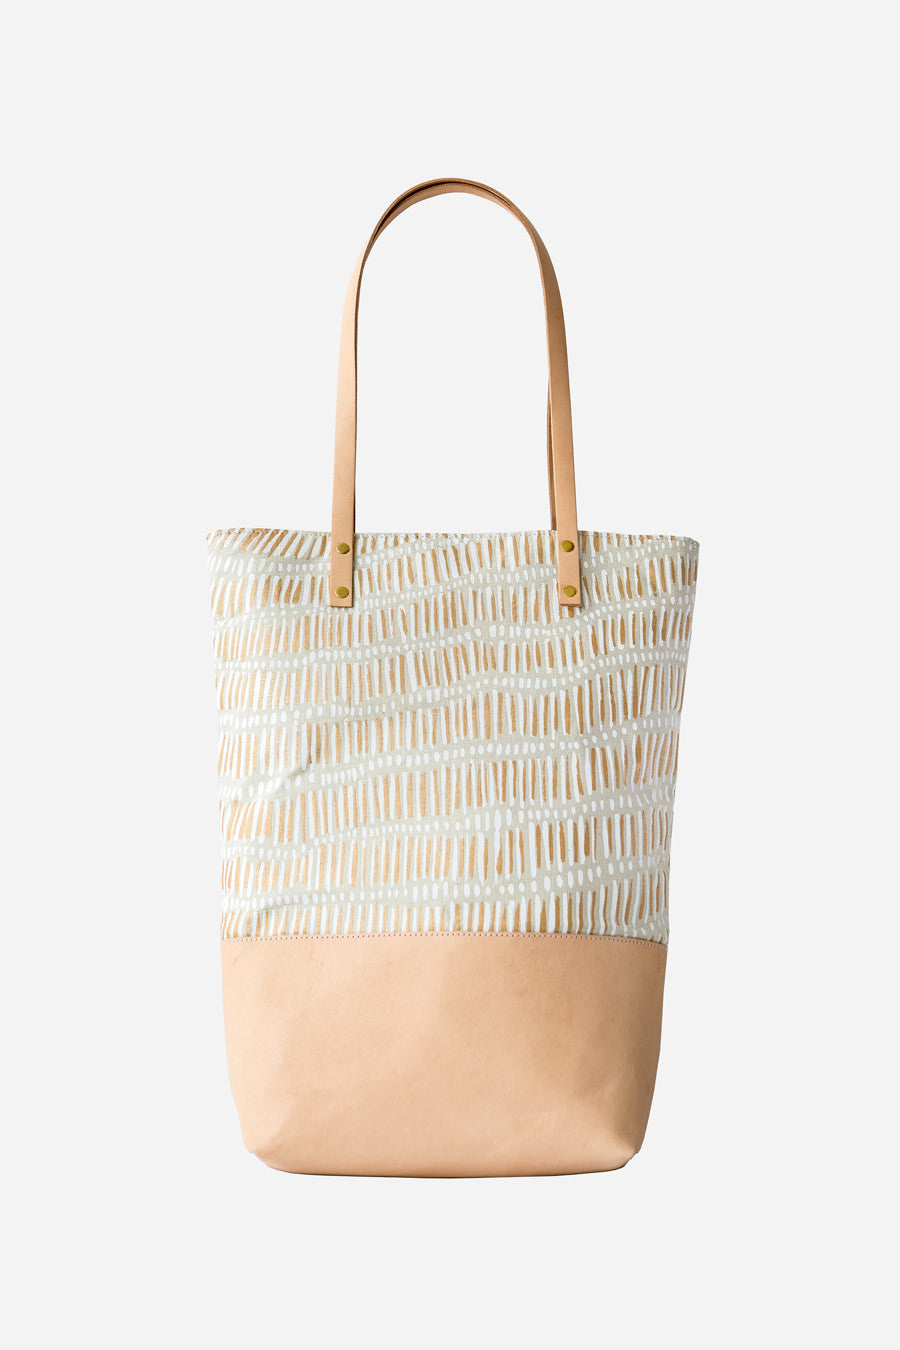 Linen with Leather Tote Bag - Fish Net